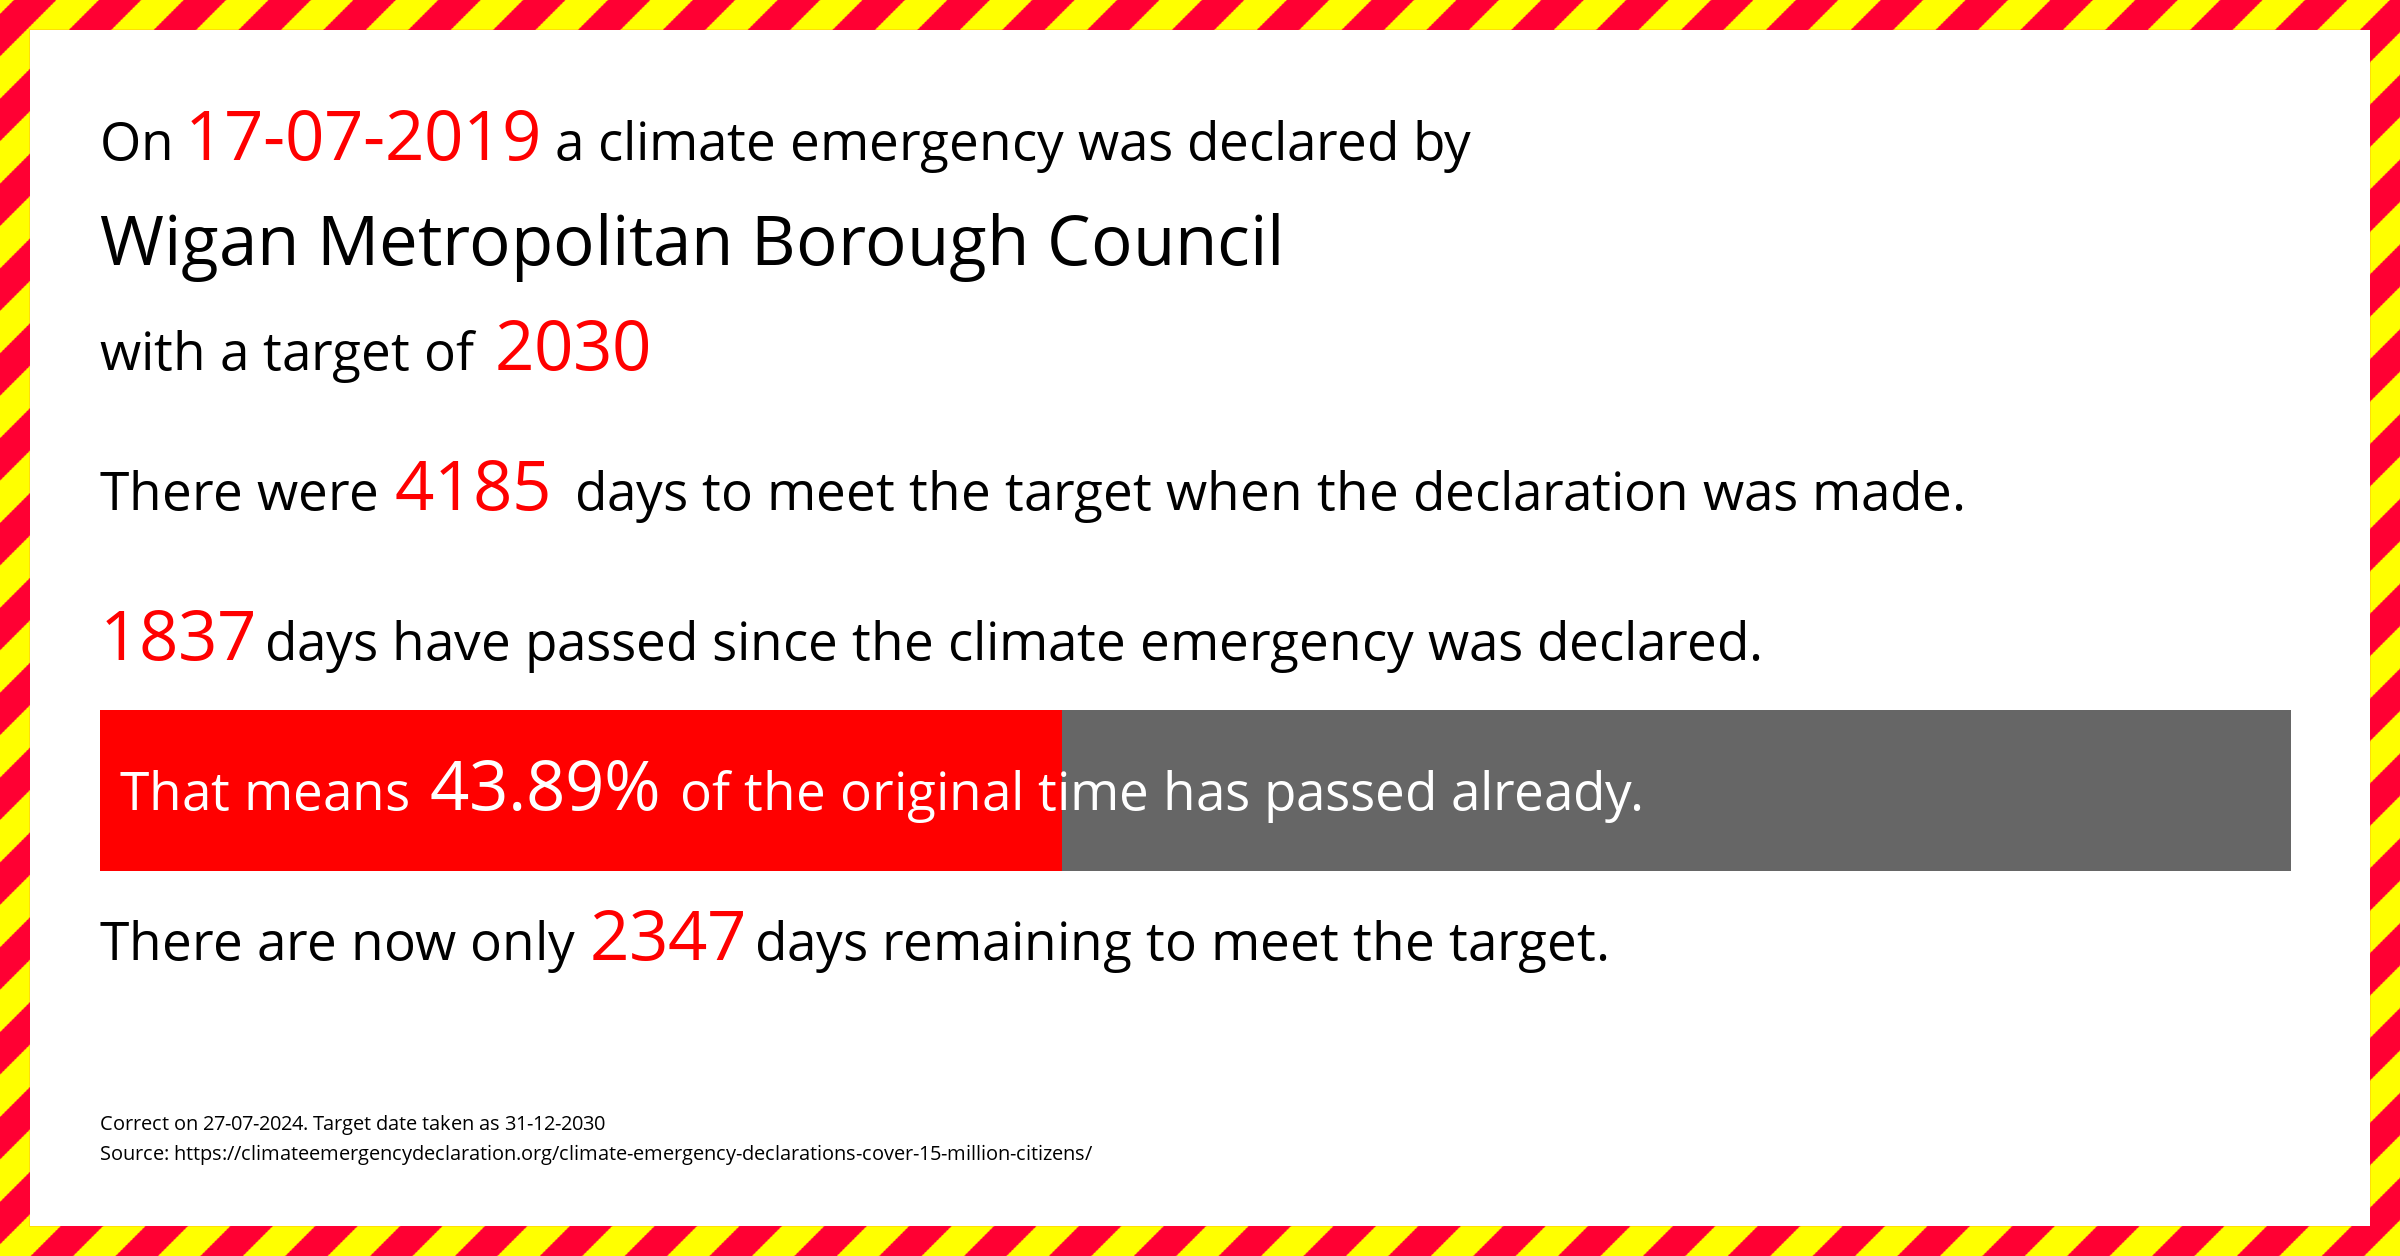 Wigan Metropolitan Borough Council declared a Climate emergency on Wednesday 17th July 2019, with a target of 2030.